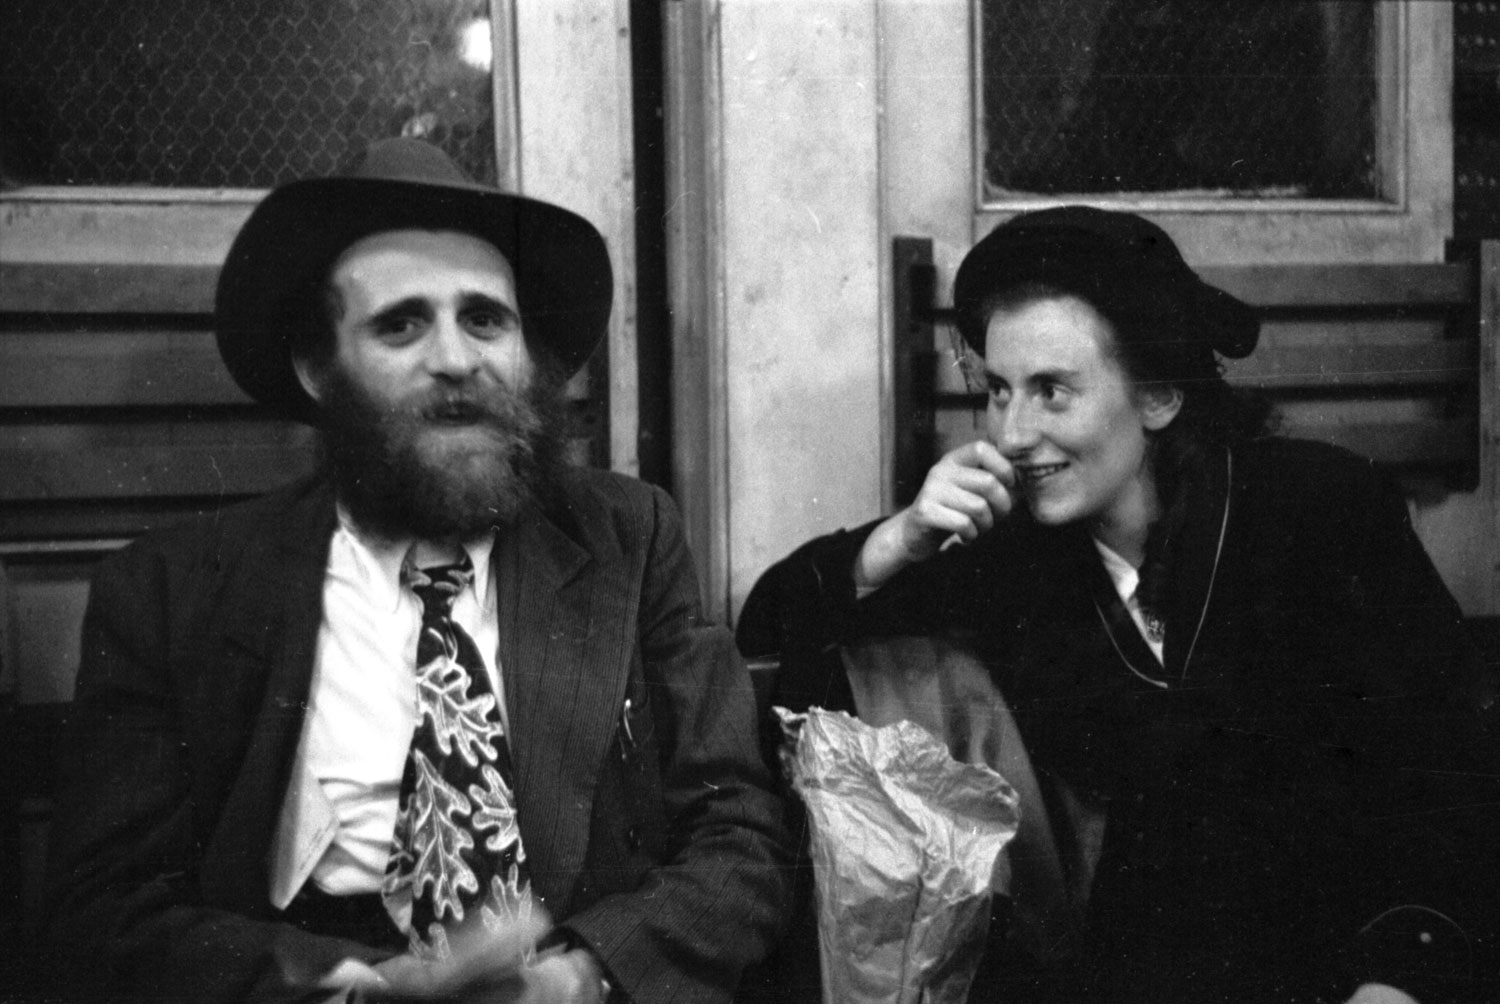 Rachel Pewzner, 20, and her 24-year-old husband, Schulim, at Ellis Island, 1950.